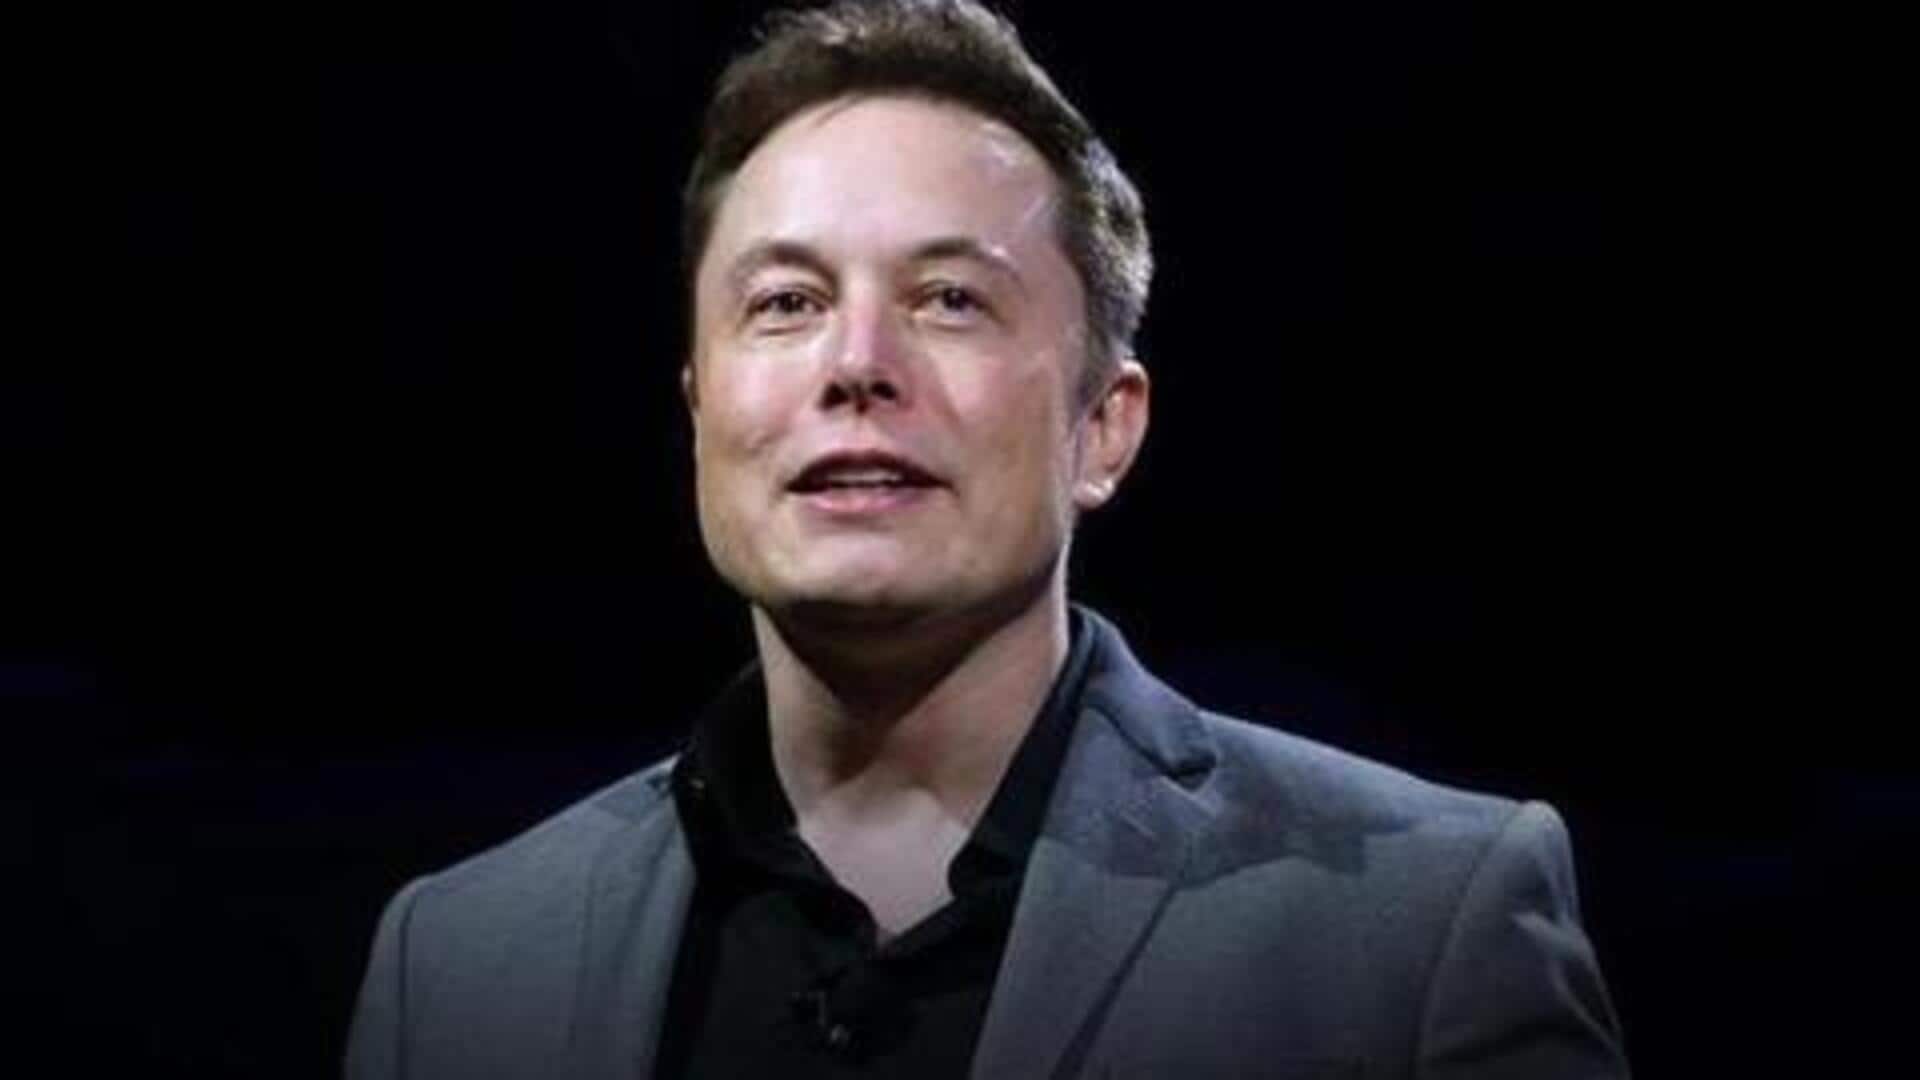 Tesla shareholders are approving $56B pay package, claims Elon Musk